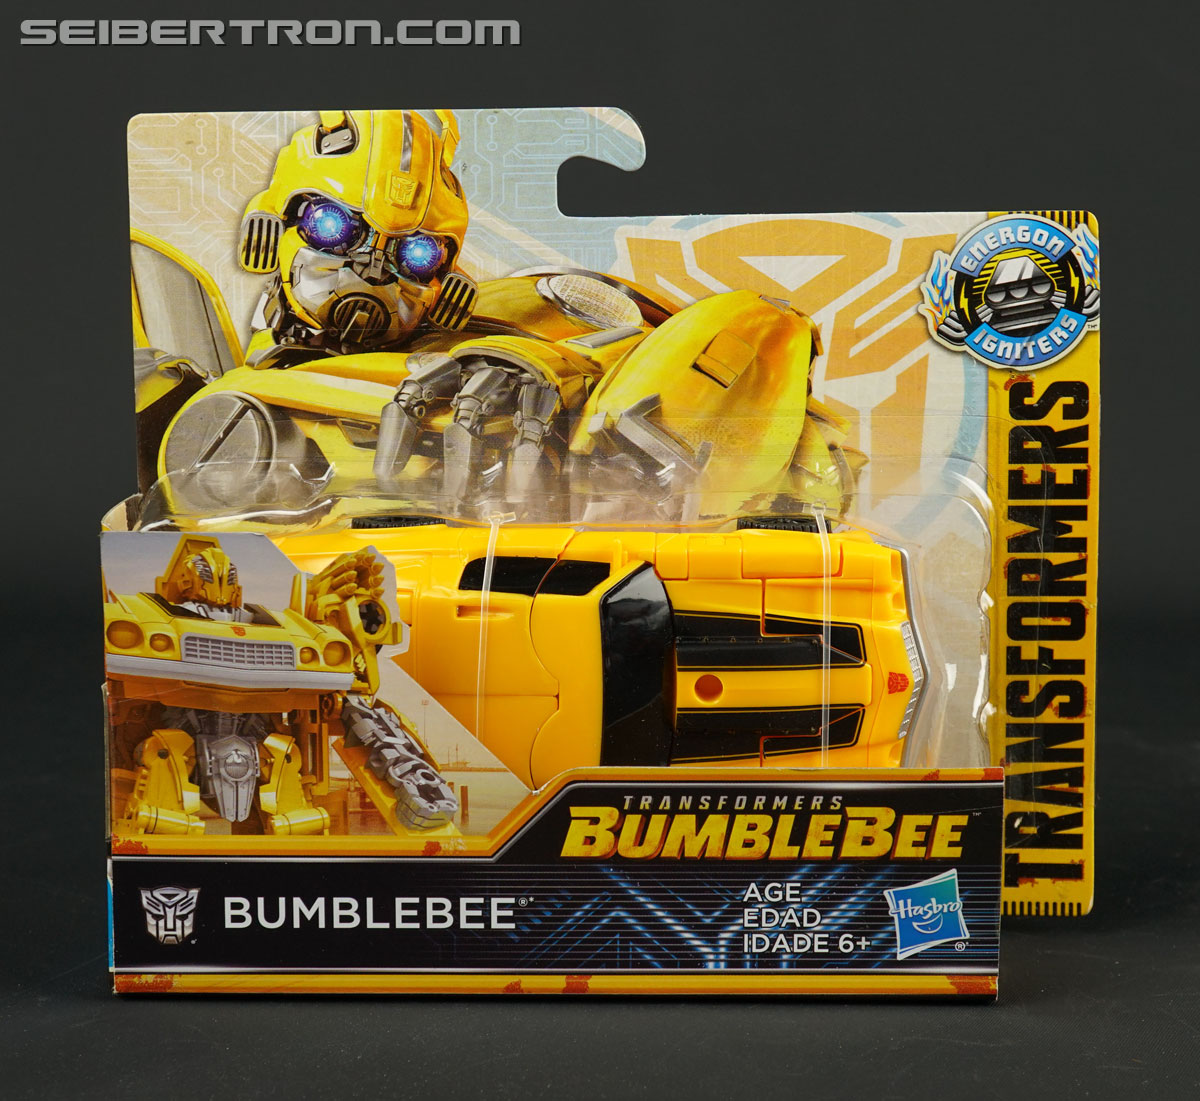 Bumblebee Movie Toys Unboxing #JoinTheBuzz